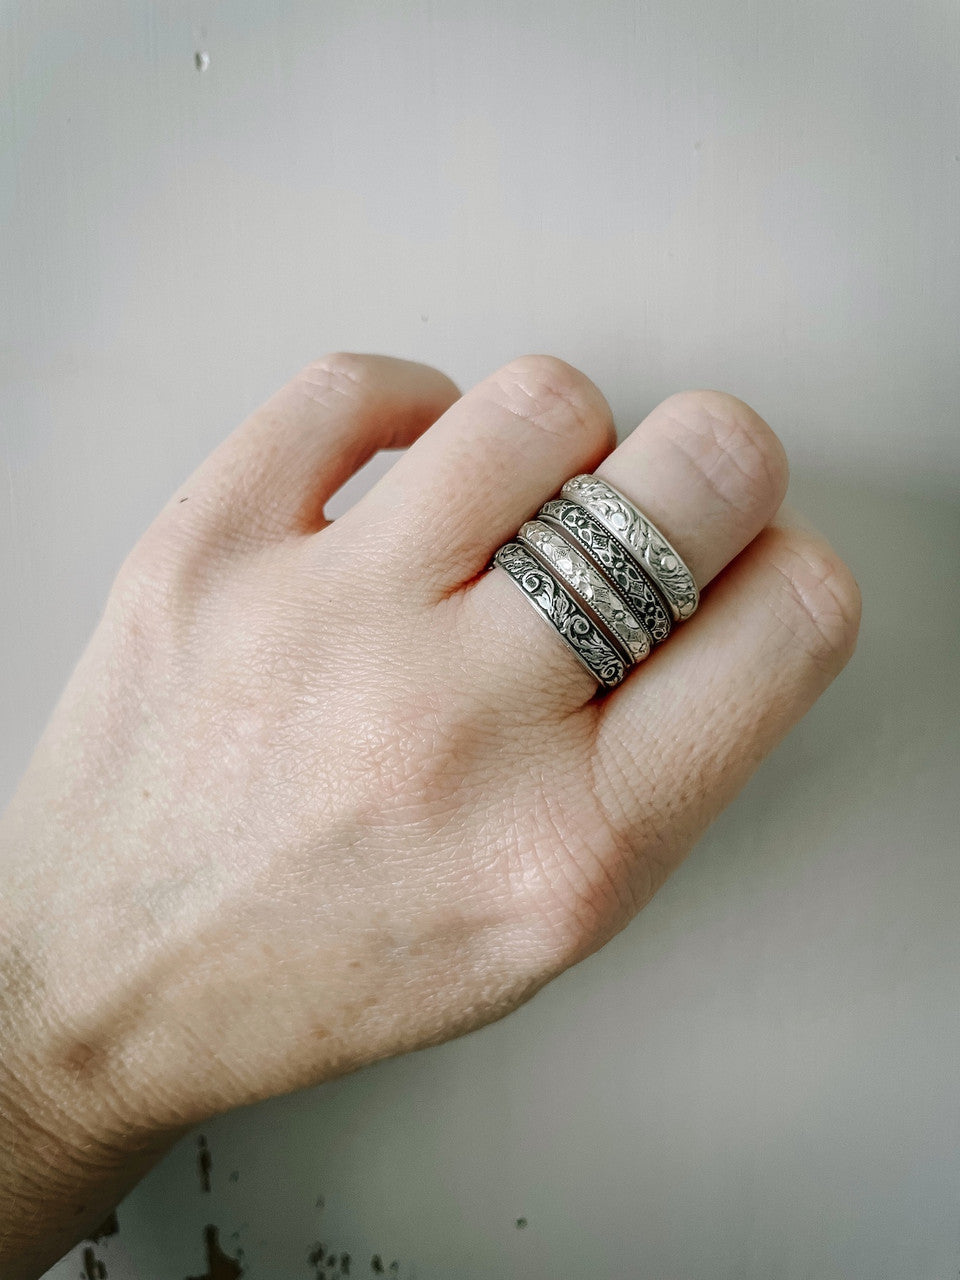 Four different stacking rings on middle finger. Mix and match different styles and finishes.